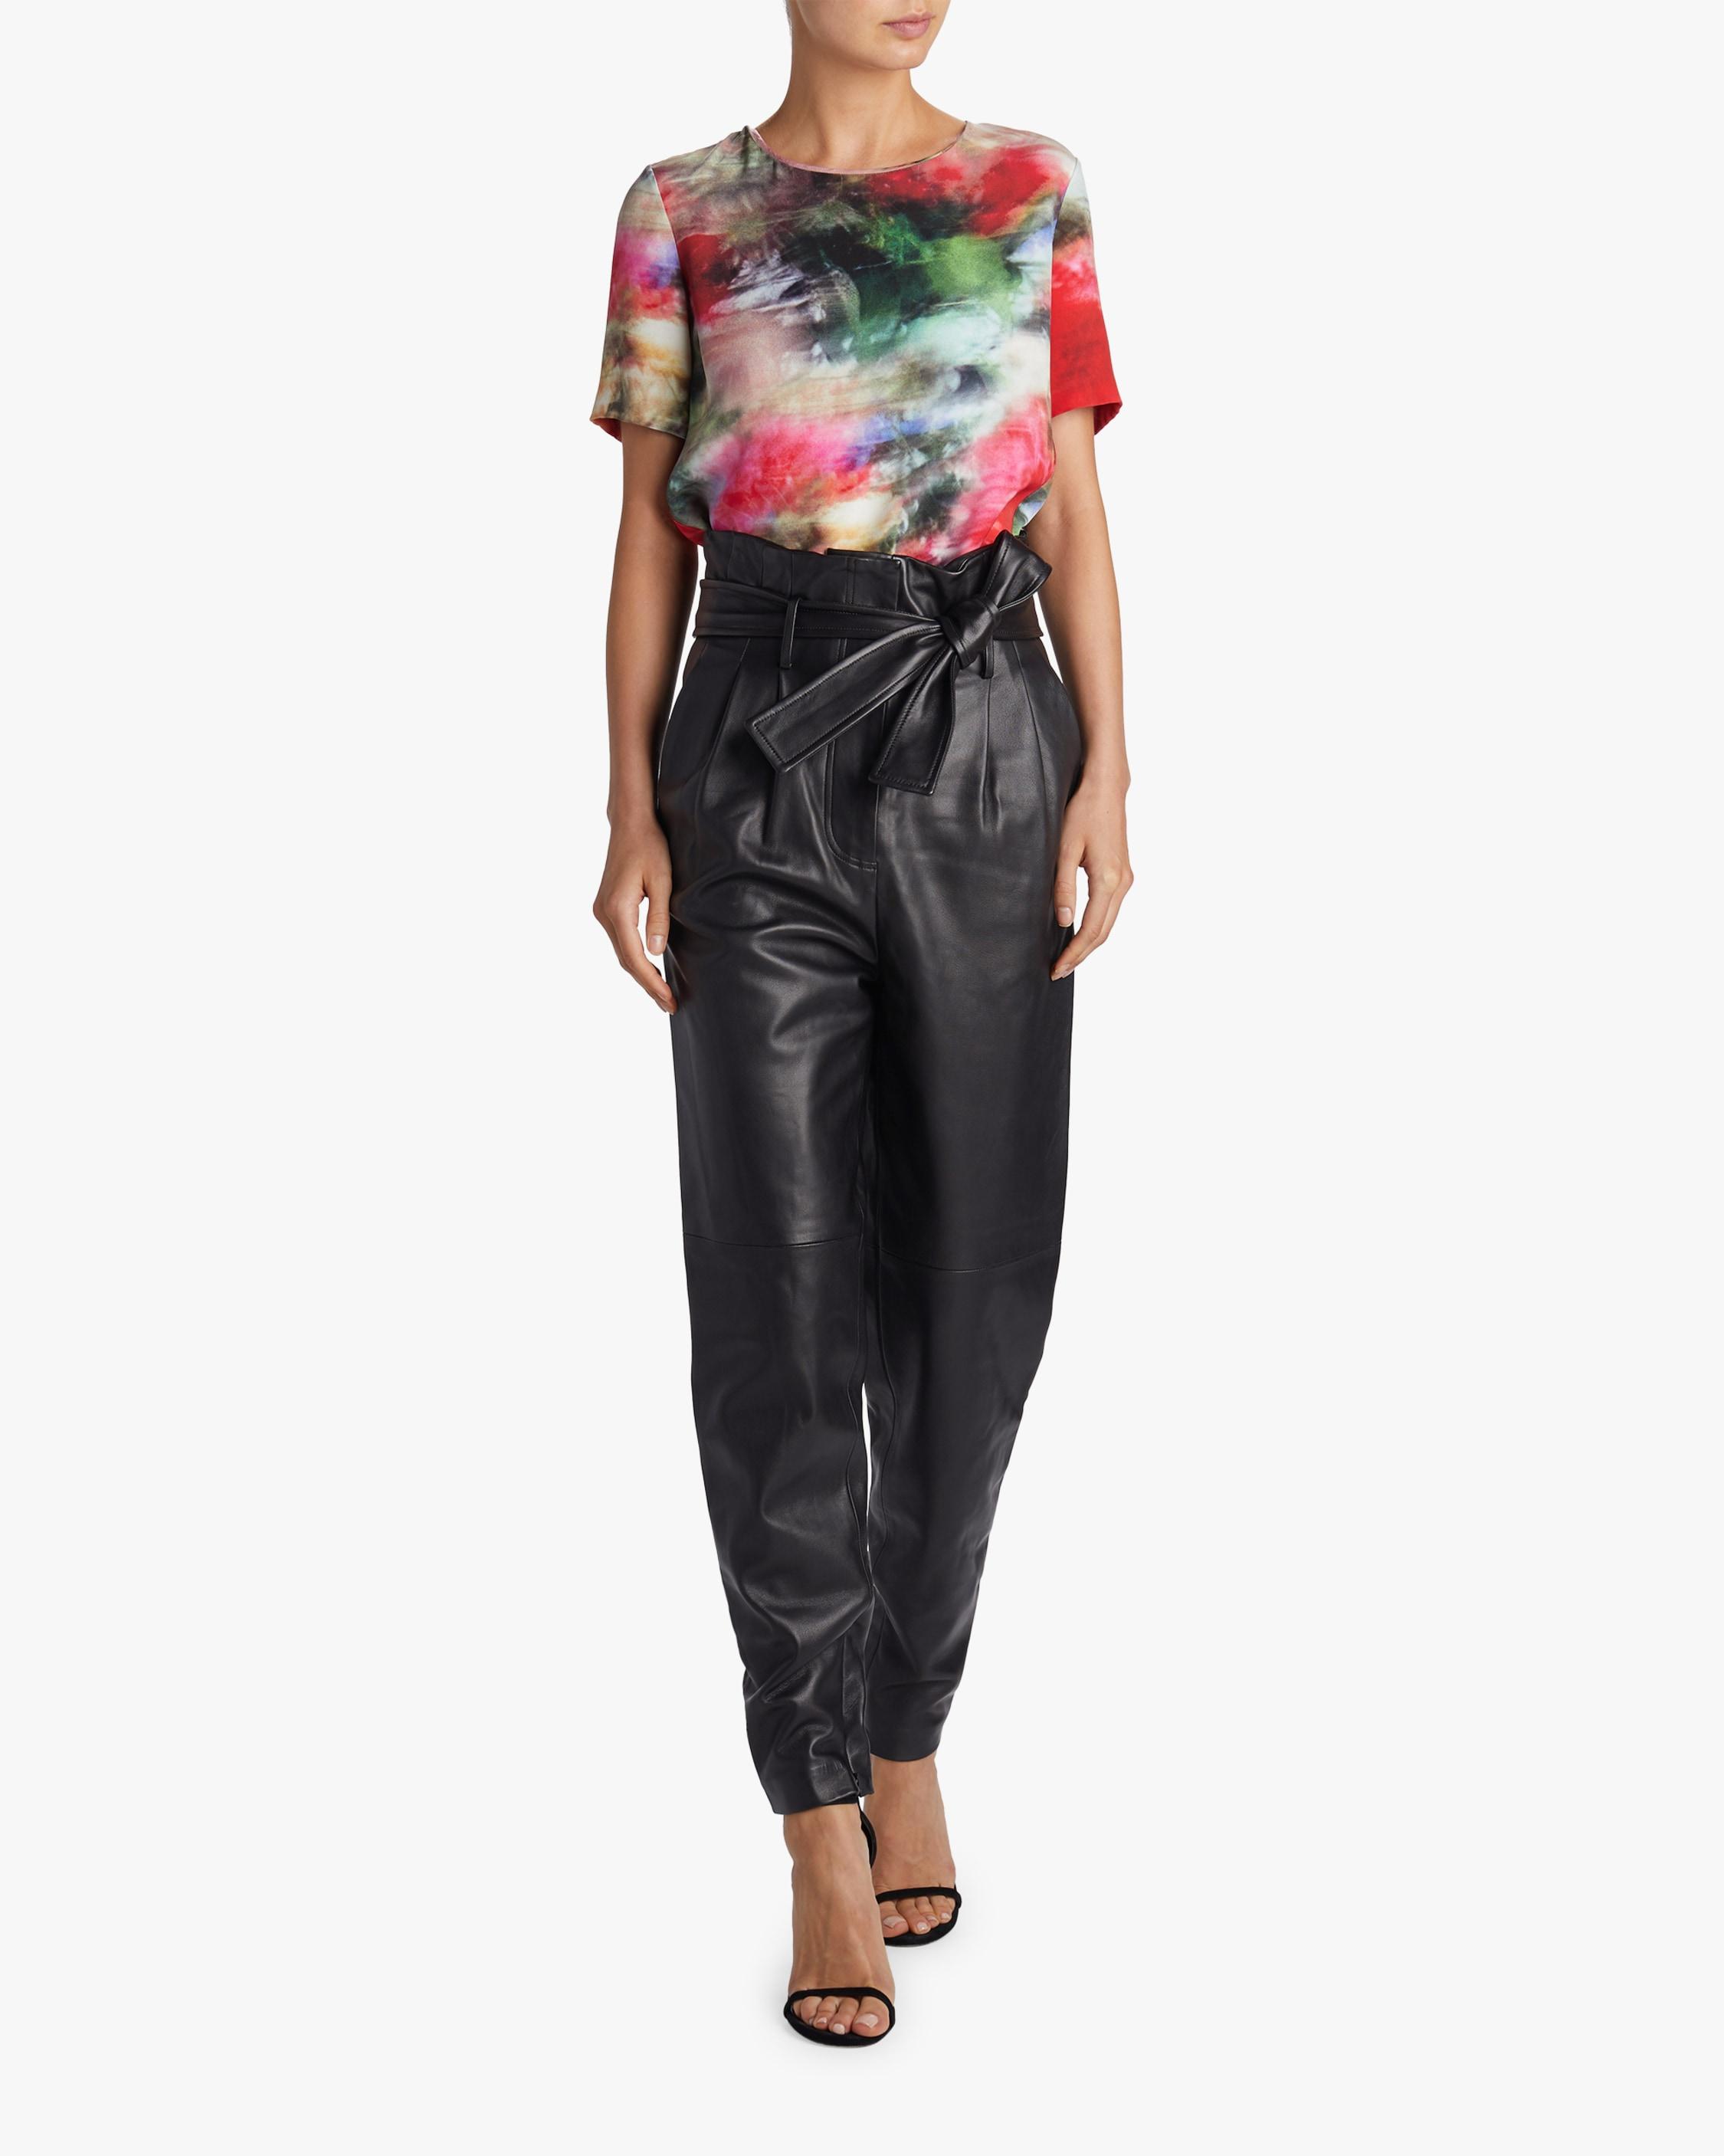 Adam Lippes Tapered Leather Pants in Black - Lyst